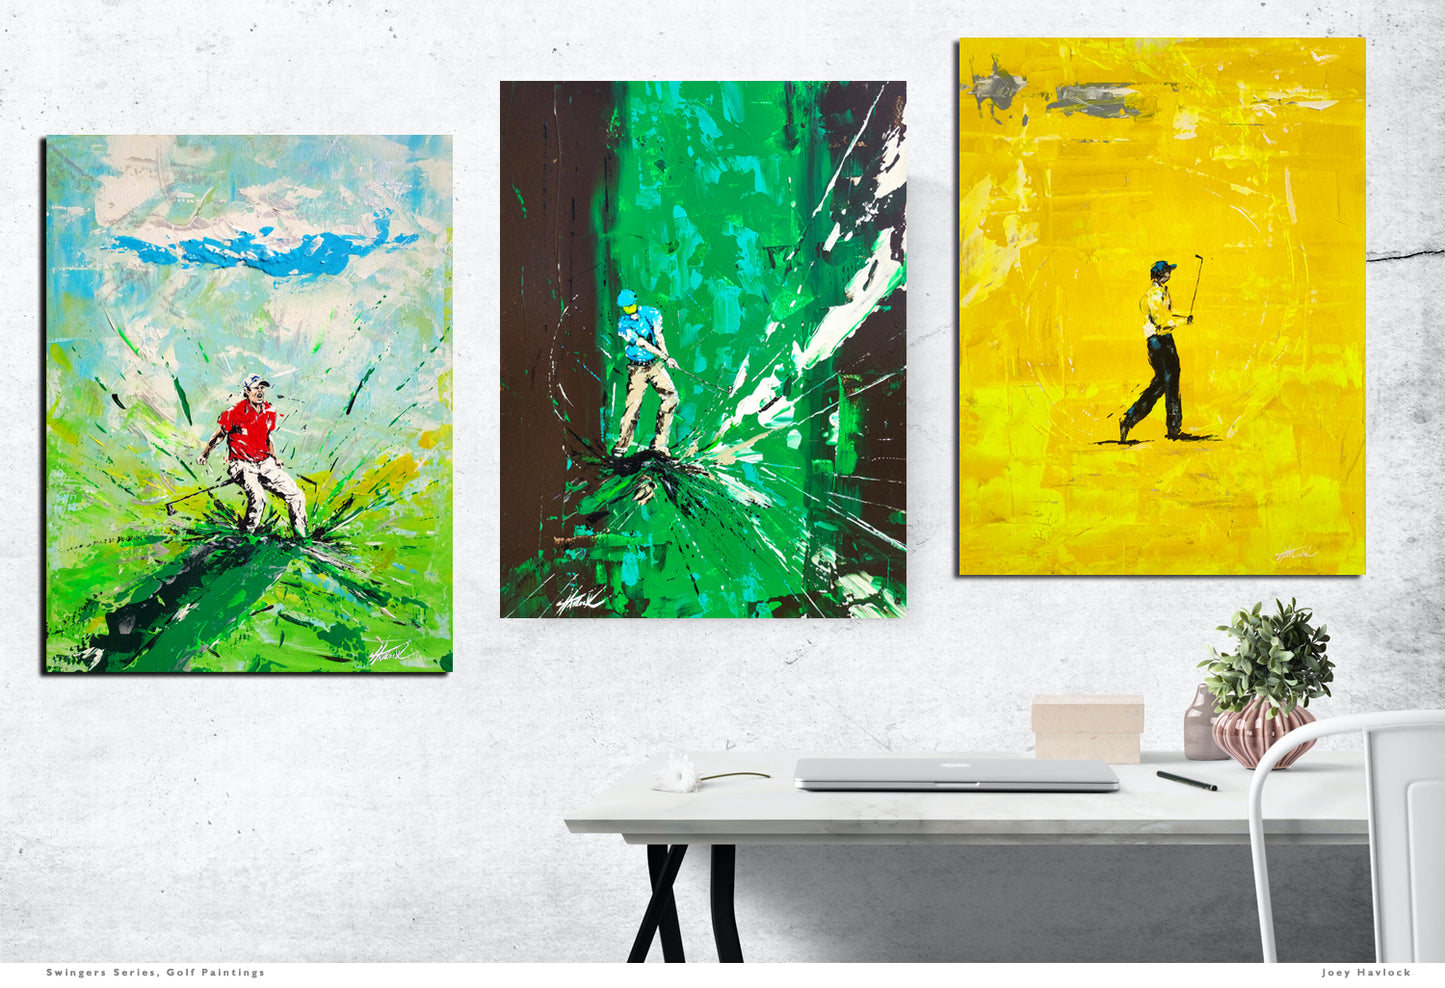 JUNGLE FEVER - Metal Print, Limited Edition 9" x 12" - SWINGERS - Impressionist Golf Series by Joey Havlock